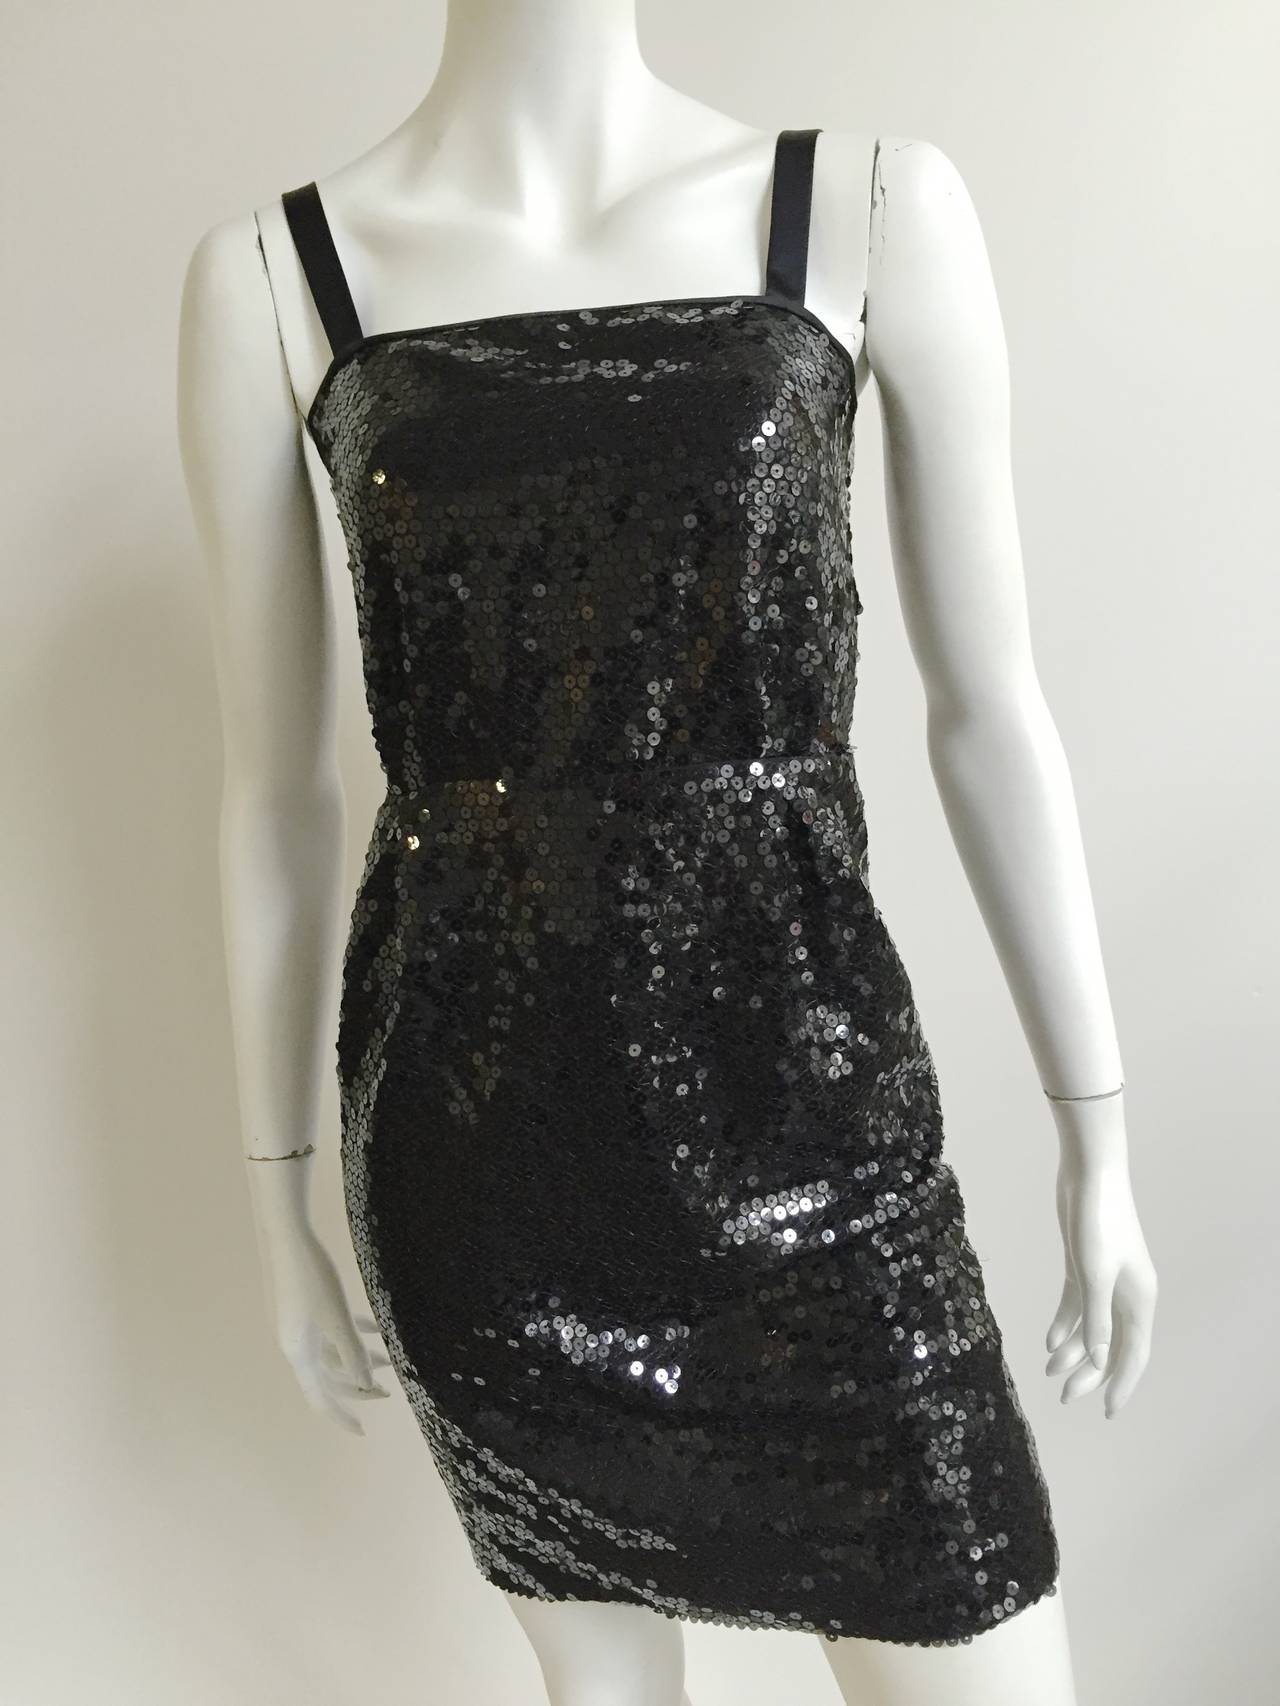 Laura Biagiotti 1980s black sequin cocktail dress size original size Italian 42 but fits like a modern USA size 4 ( Please see & use measurements to measure your body). Satin straps and zipper at back of dress. Dress is lined.
Empire waist